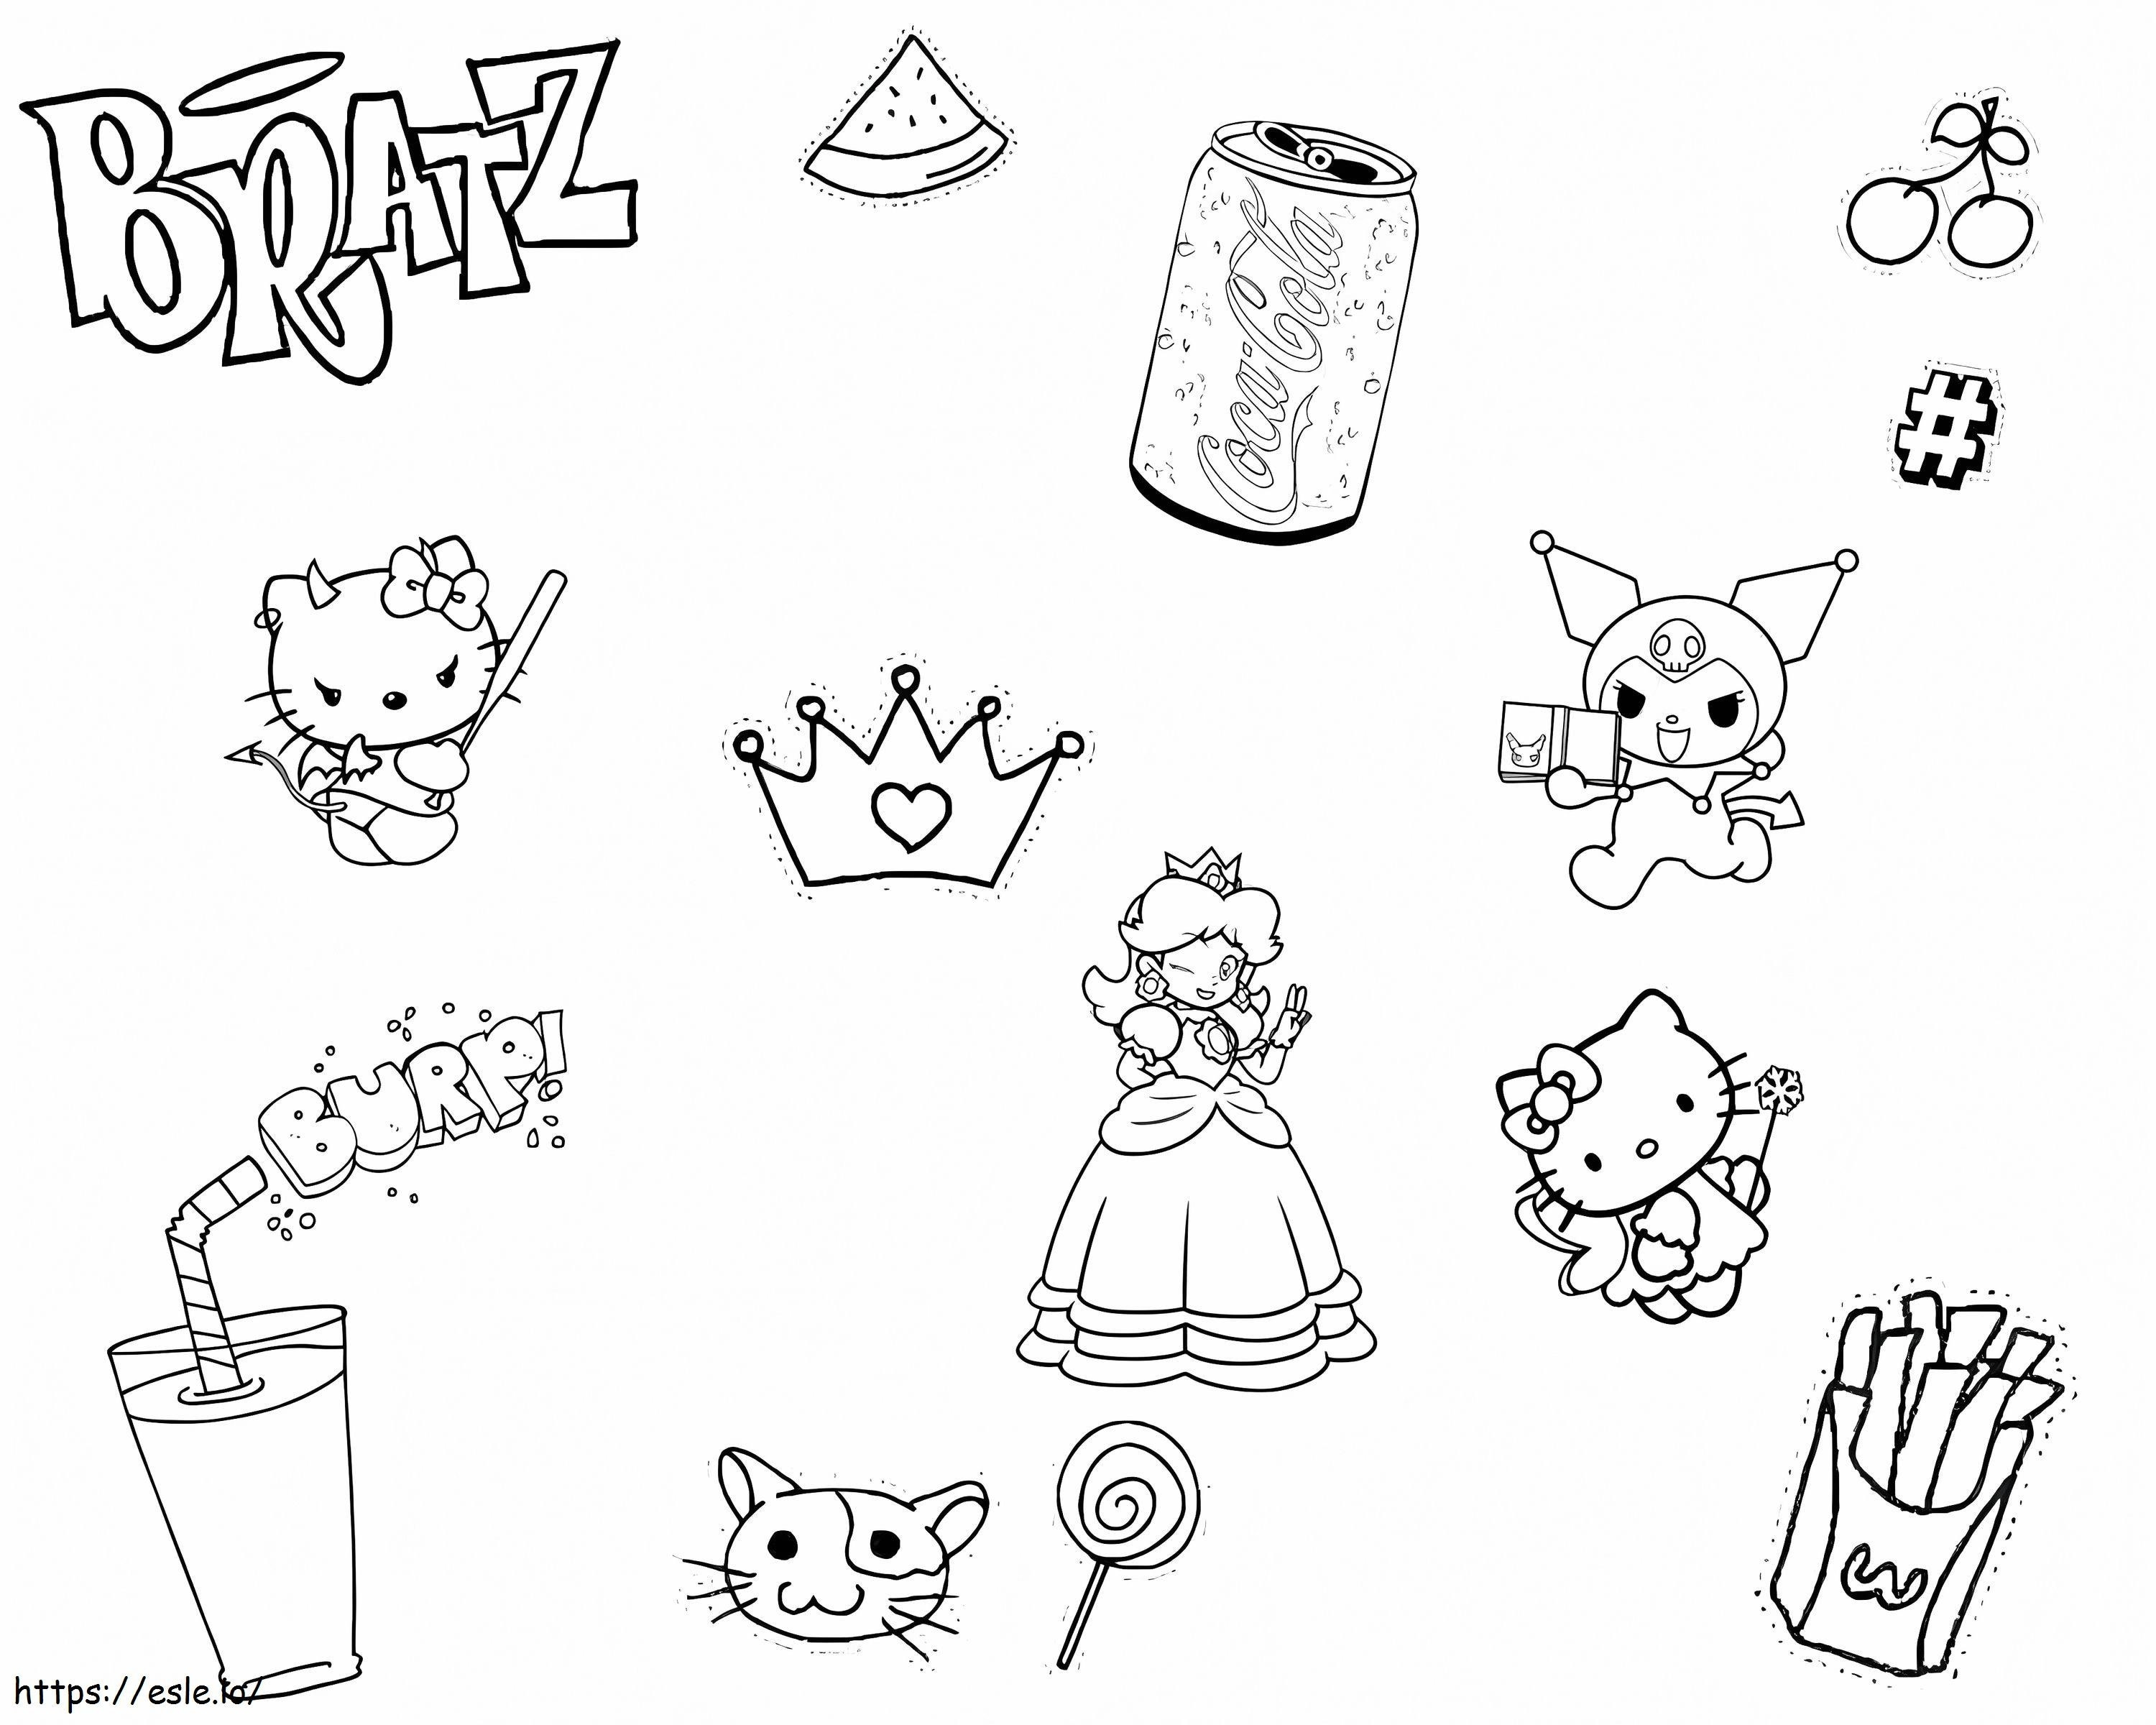 Aesthetic Hello Kitty For Girls coloring page